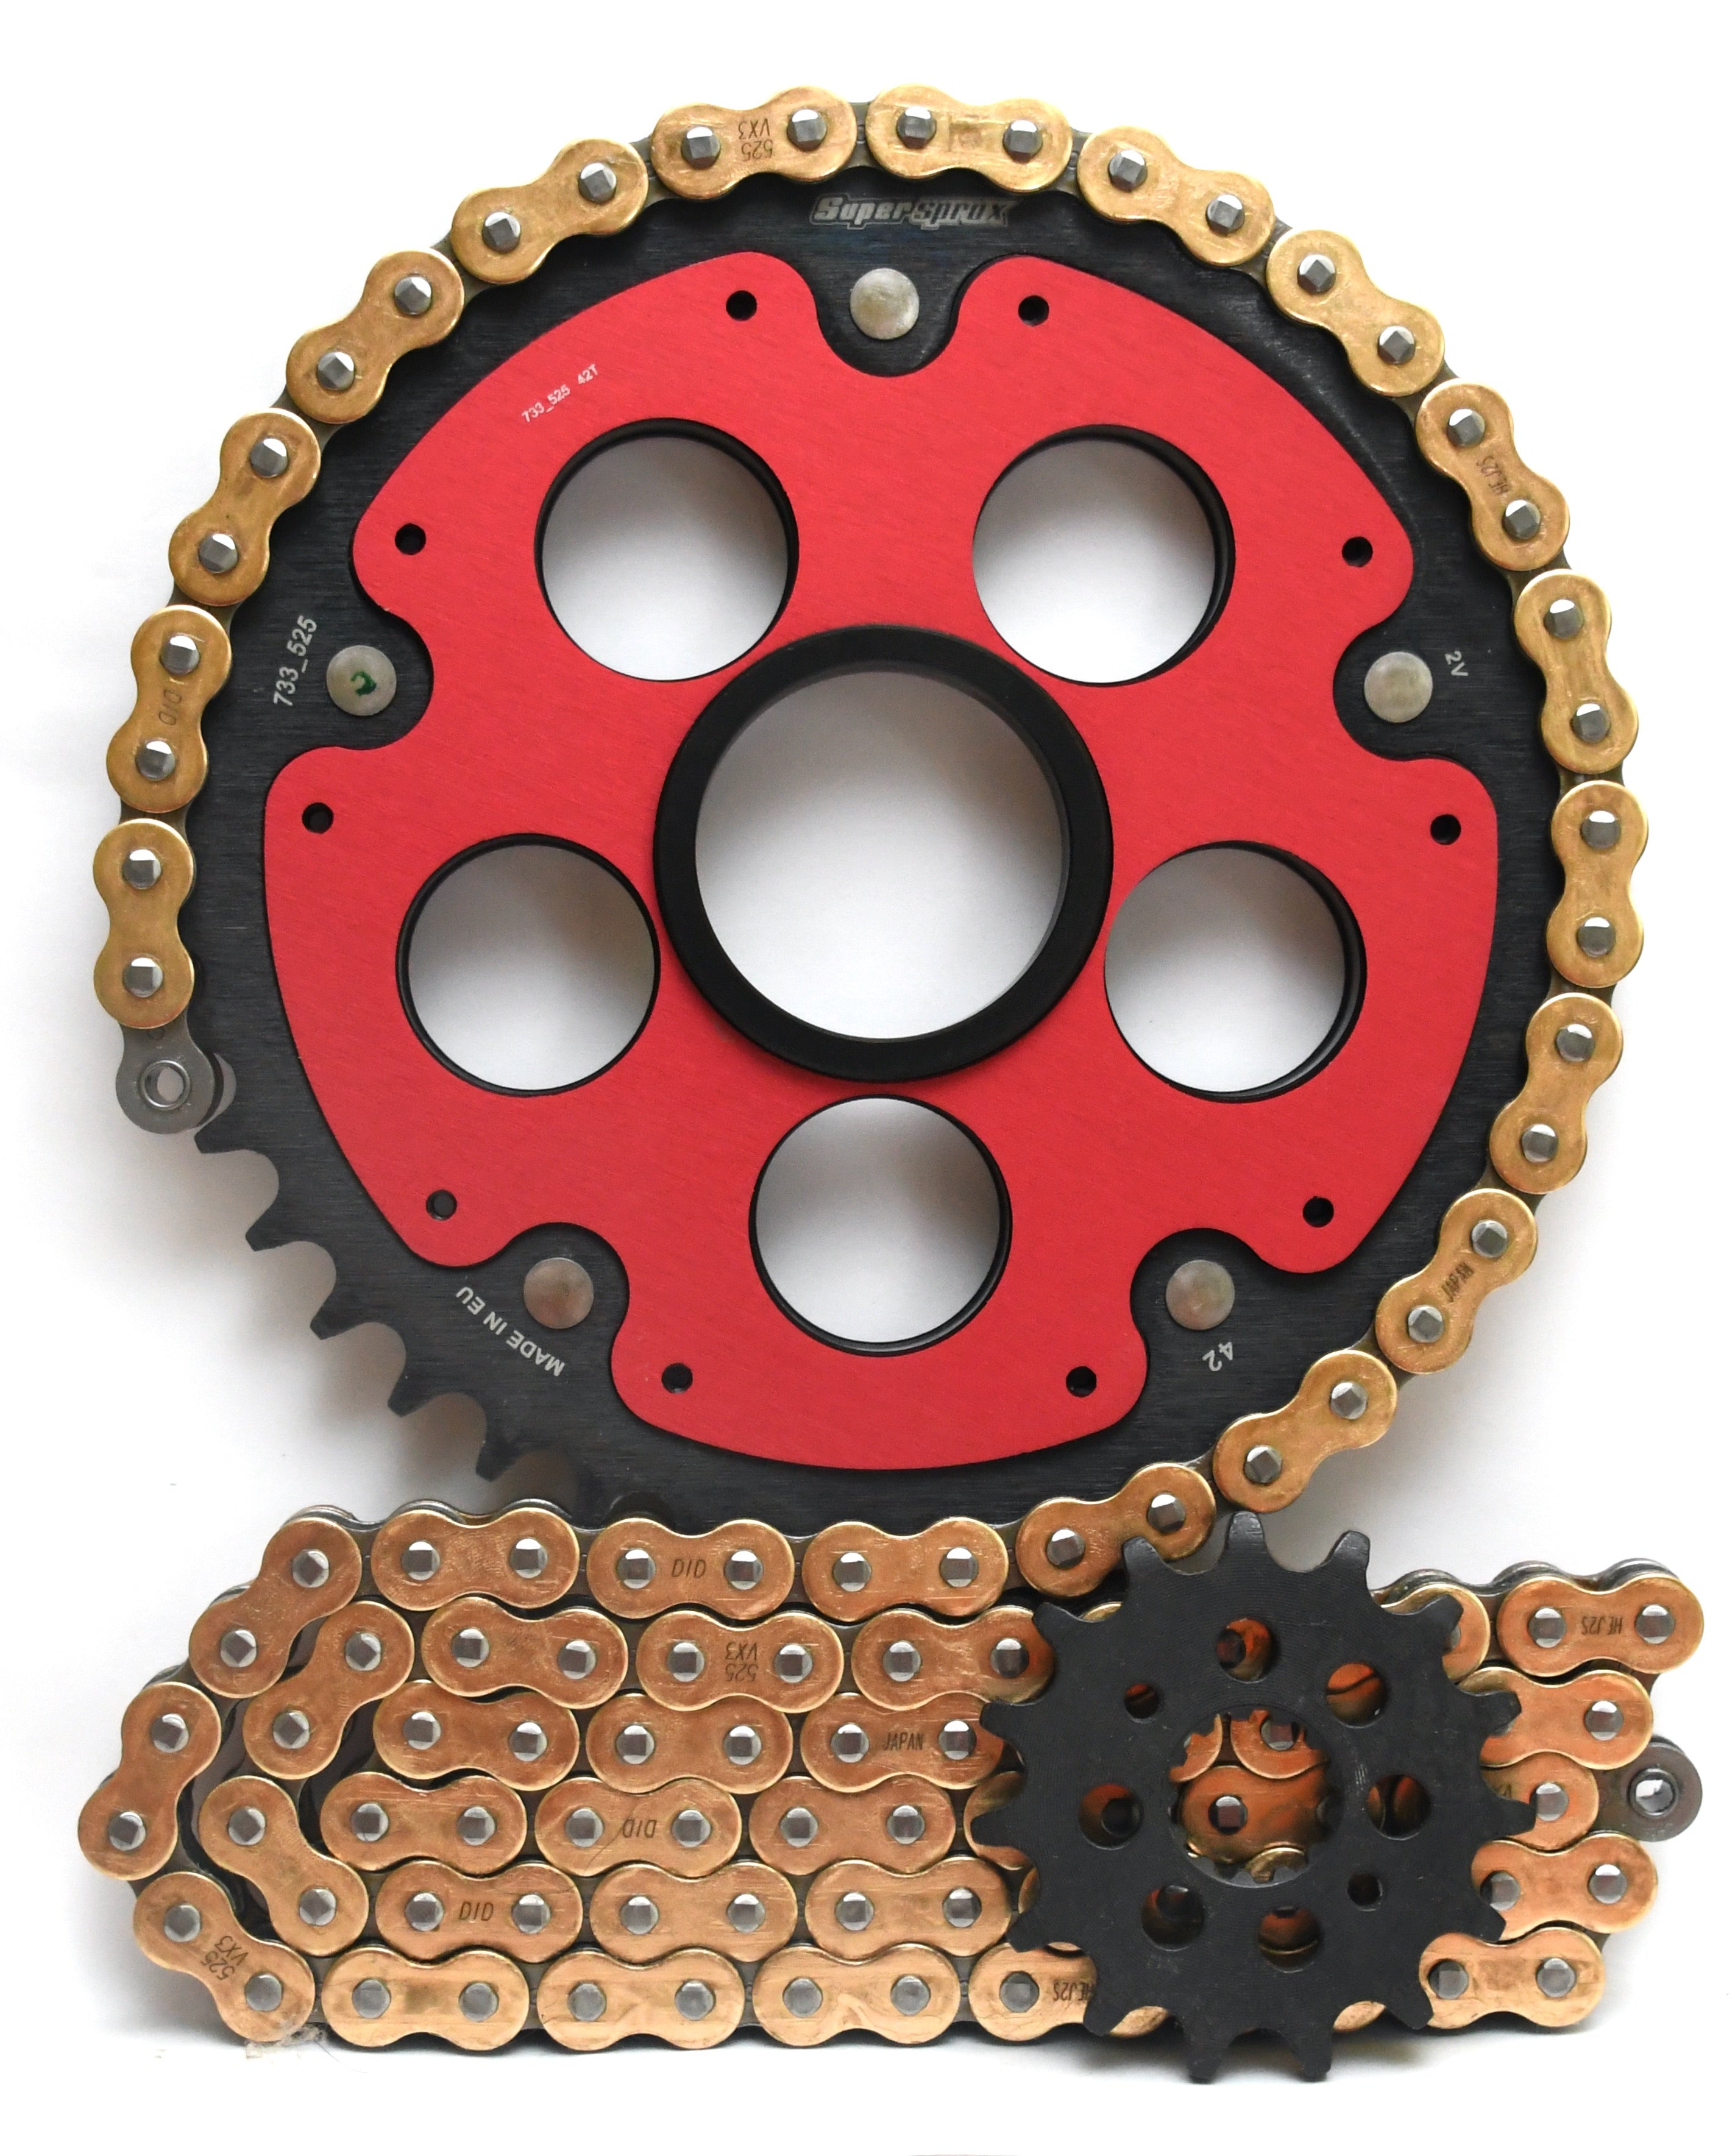 Supersprox Chain & Sprocket Kit for Ducati Monster S4R 996 2004-2006 - Standard Gearing